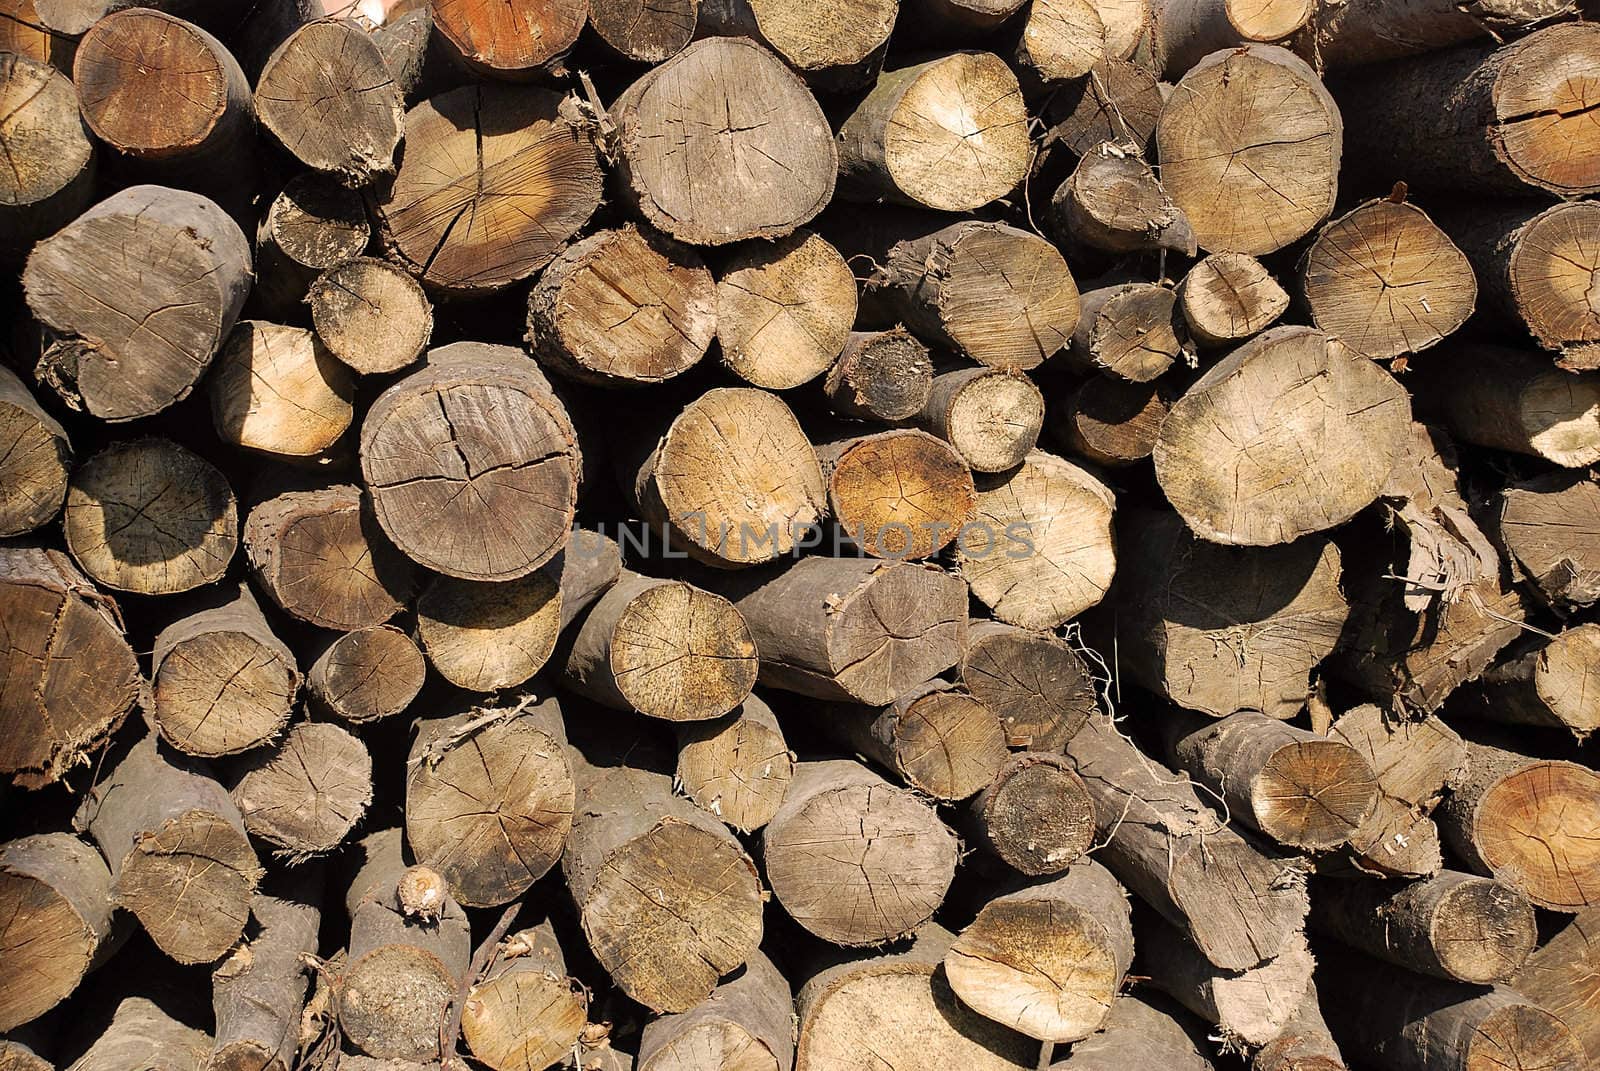 dry wood in pile outdoor background